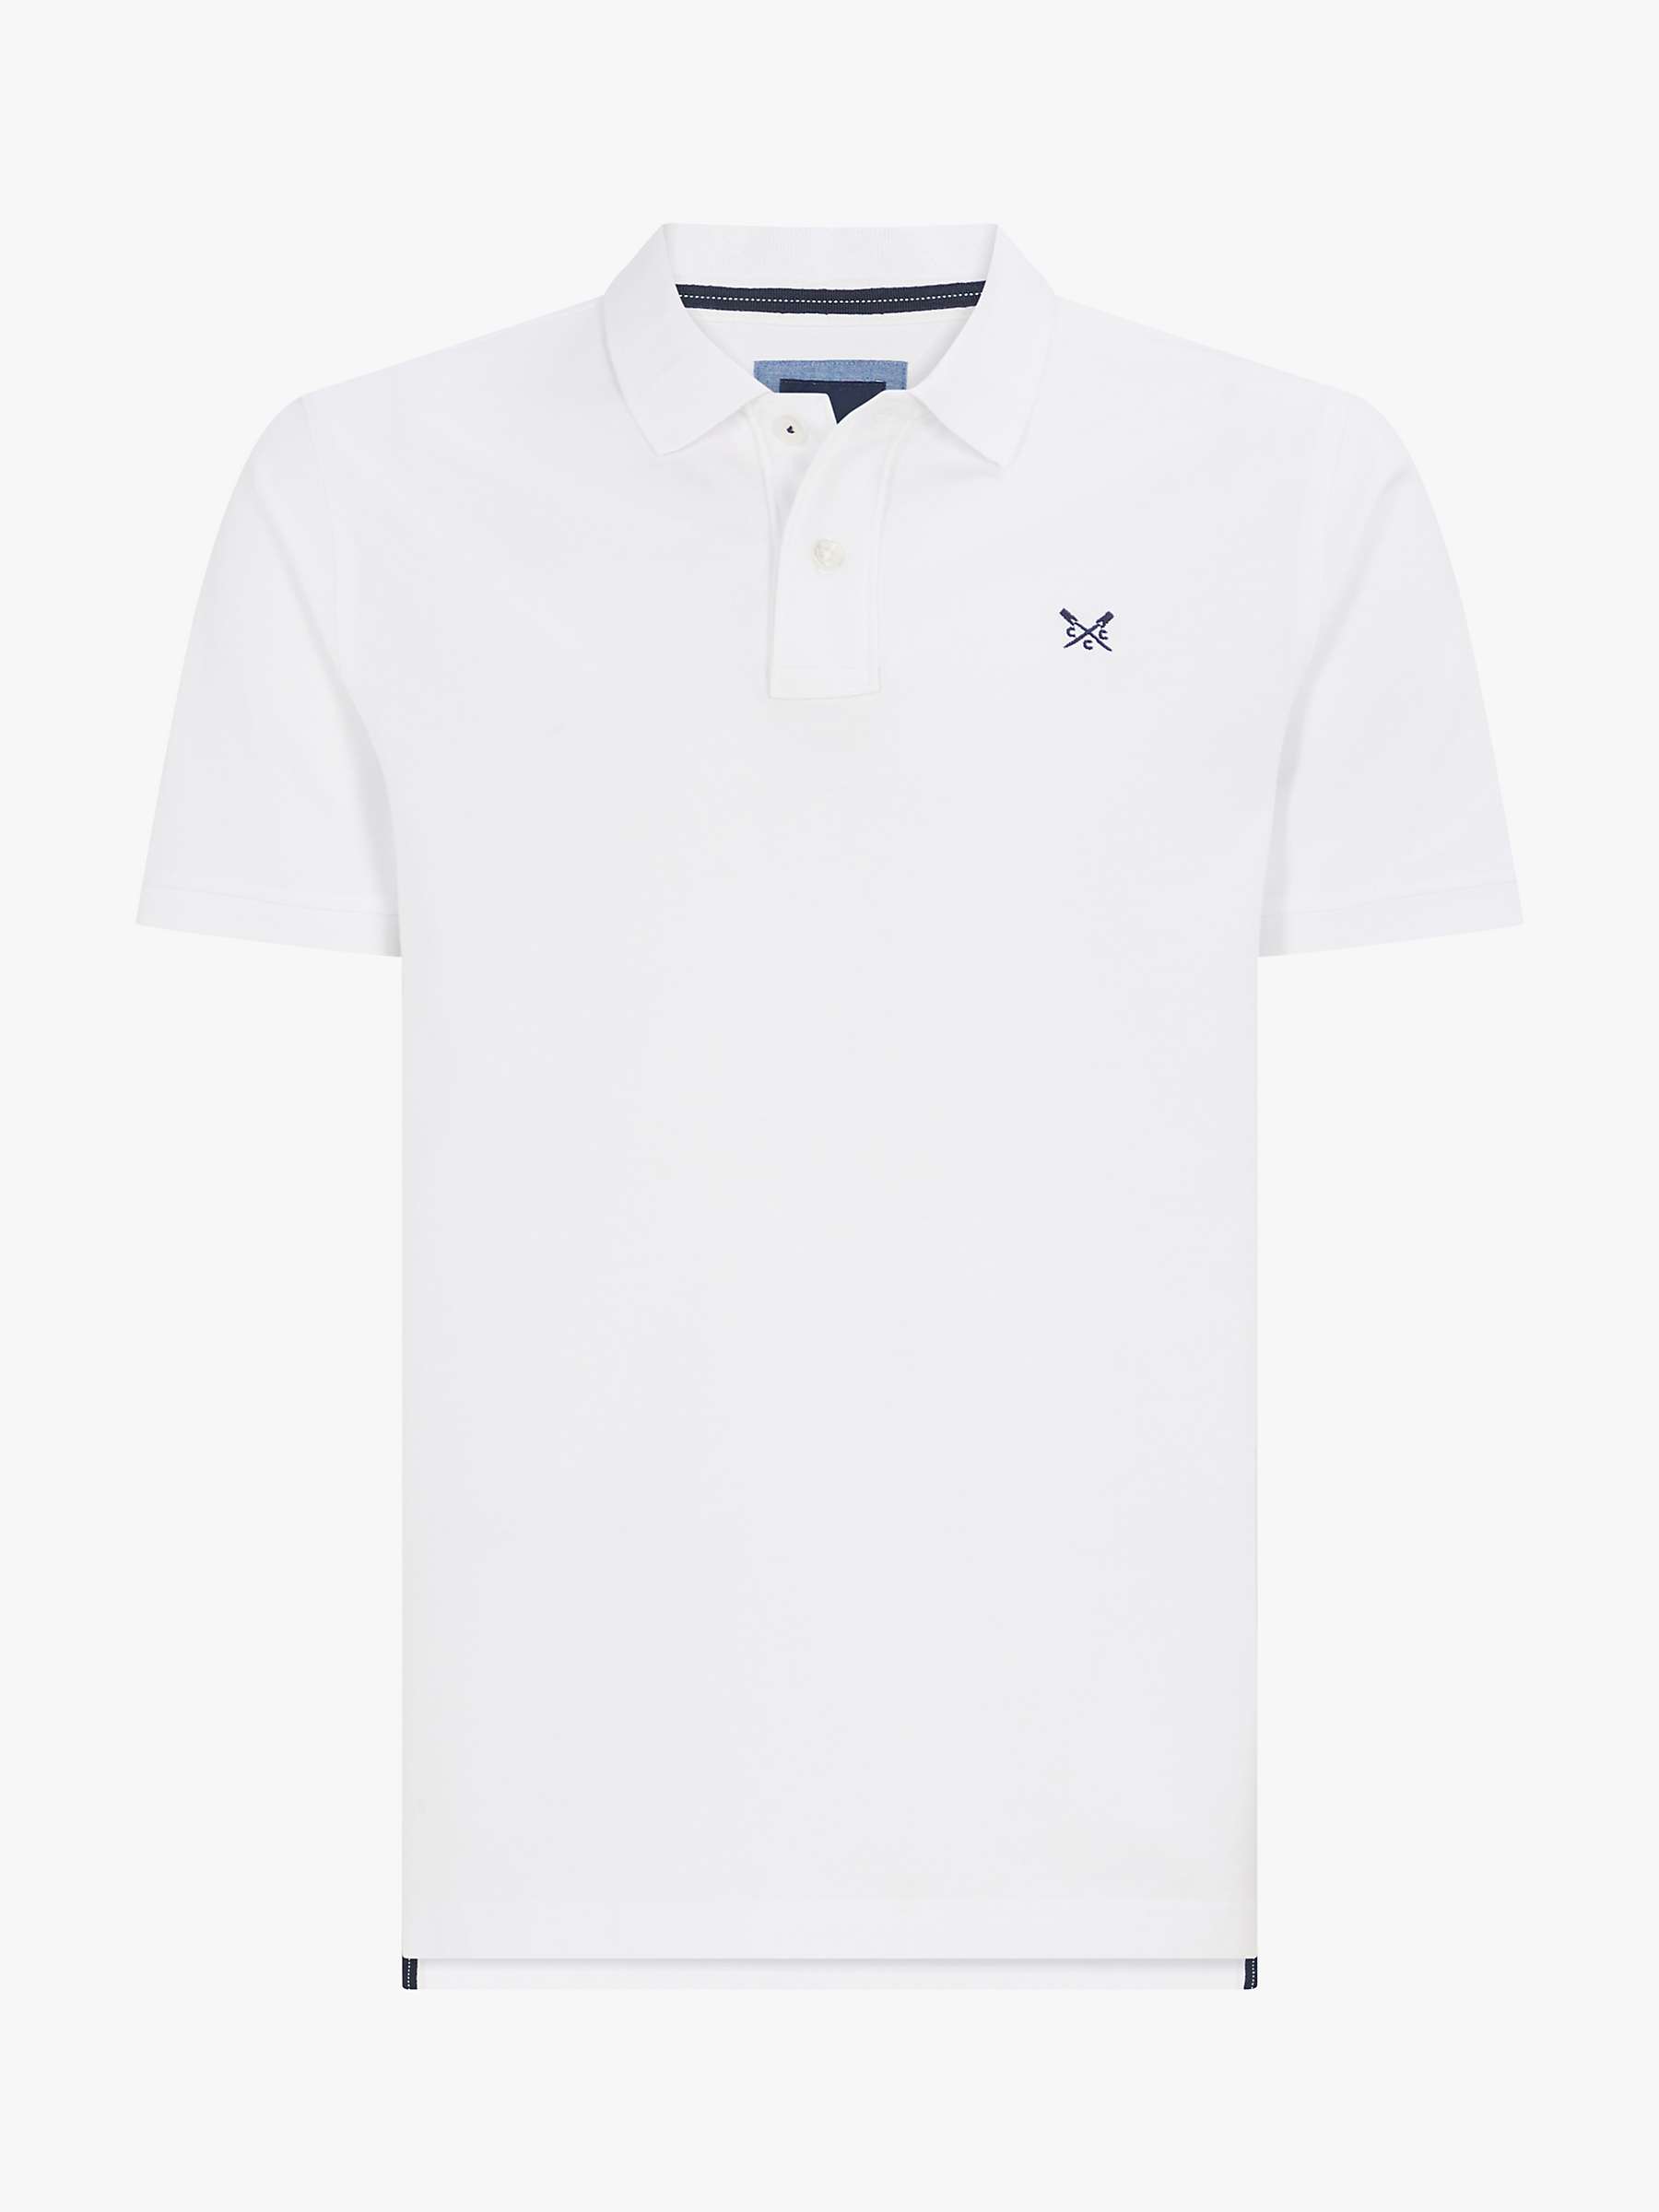 Buy Crew Clothing Sustainable Ocean Organic Cotton Polo Shirt Online at johnlewis.com